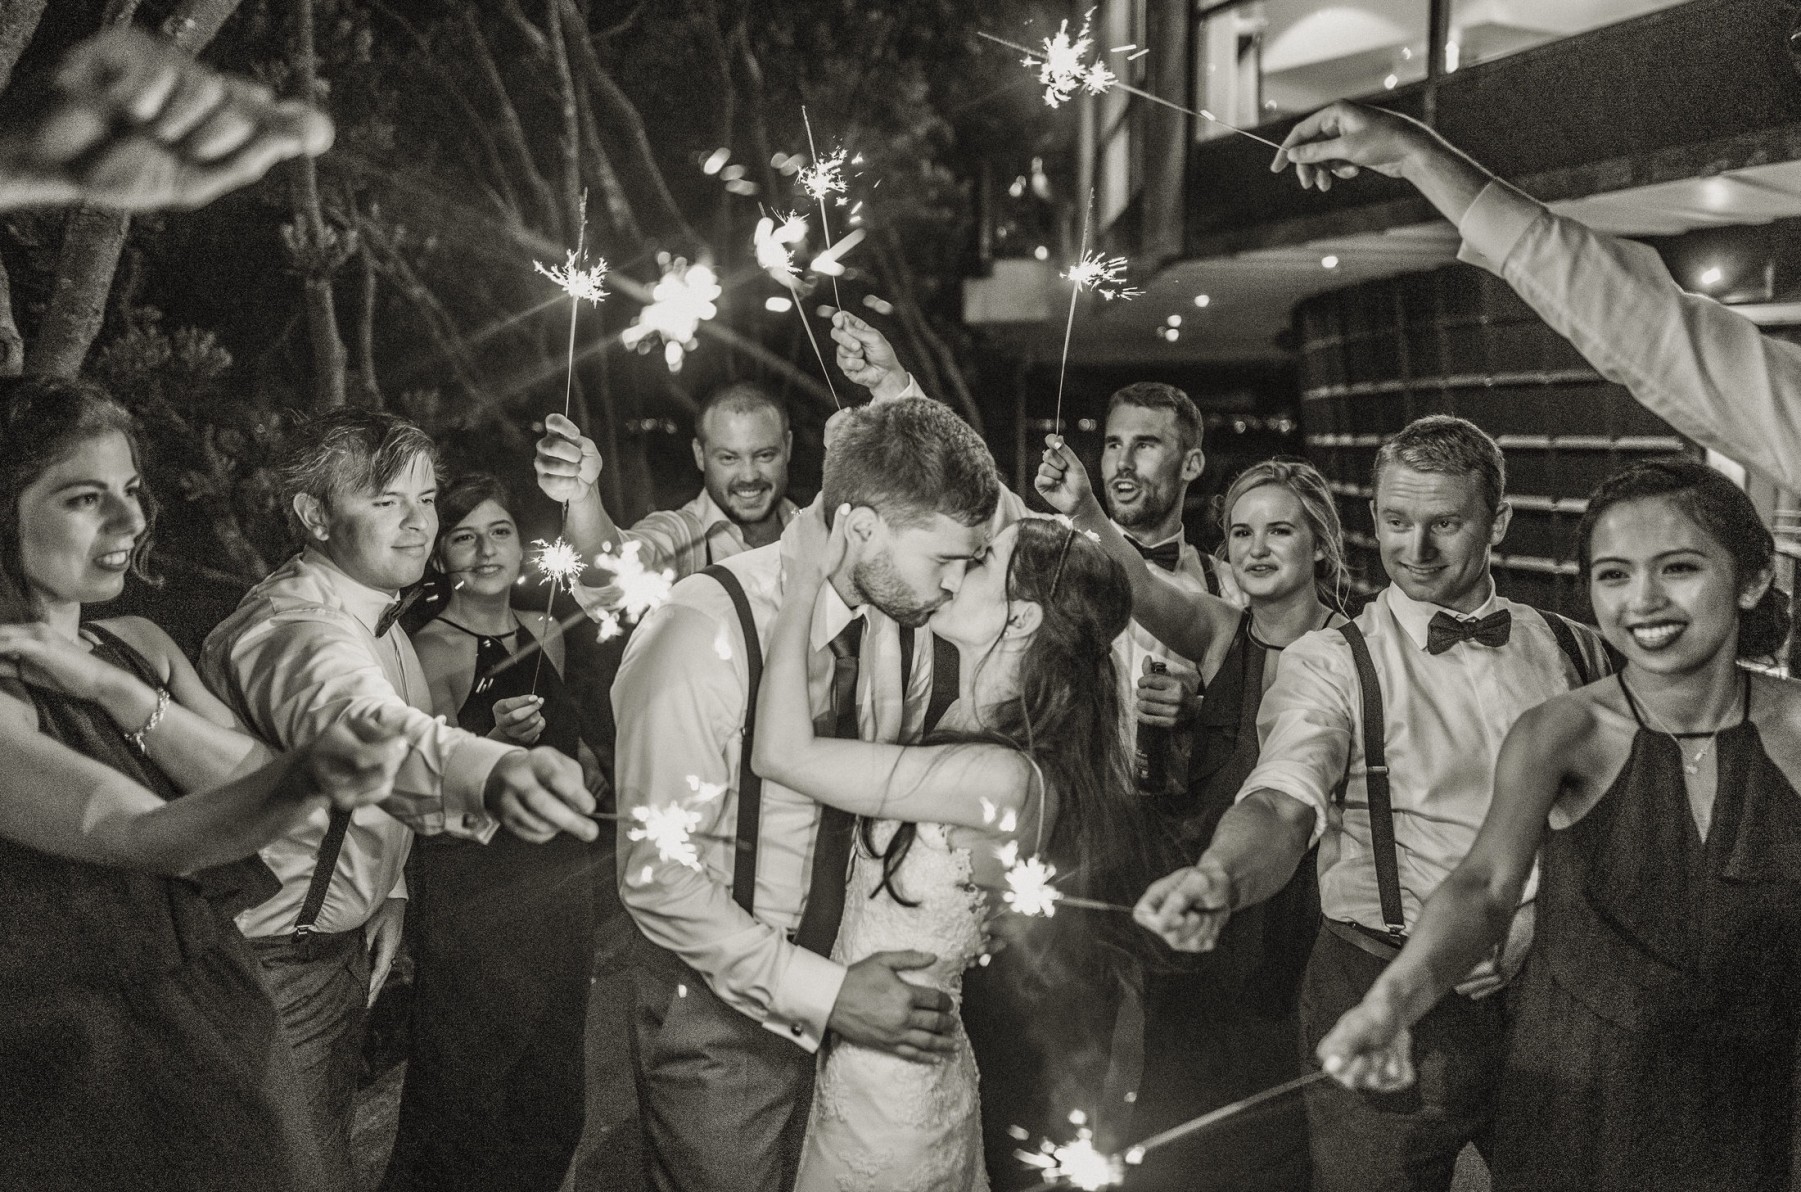 sparklers, reception, wedding, photography, guests, bridal party, bride, groom, kiss